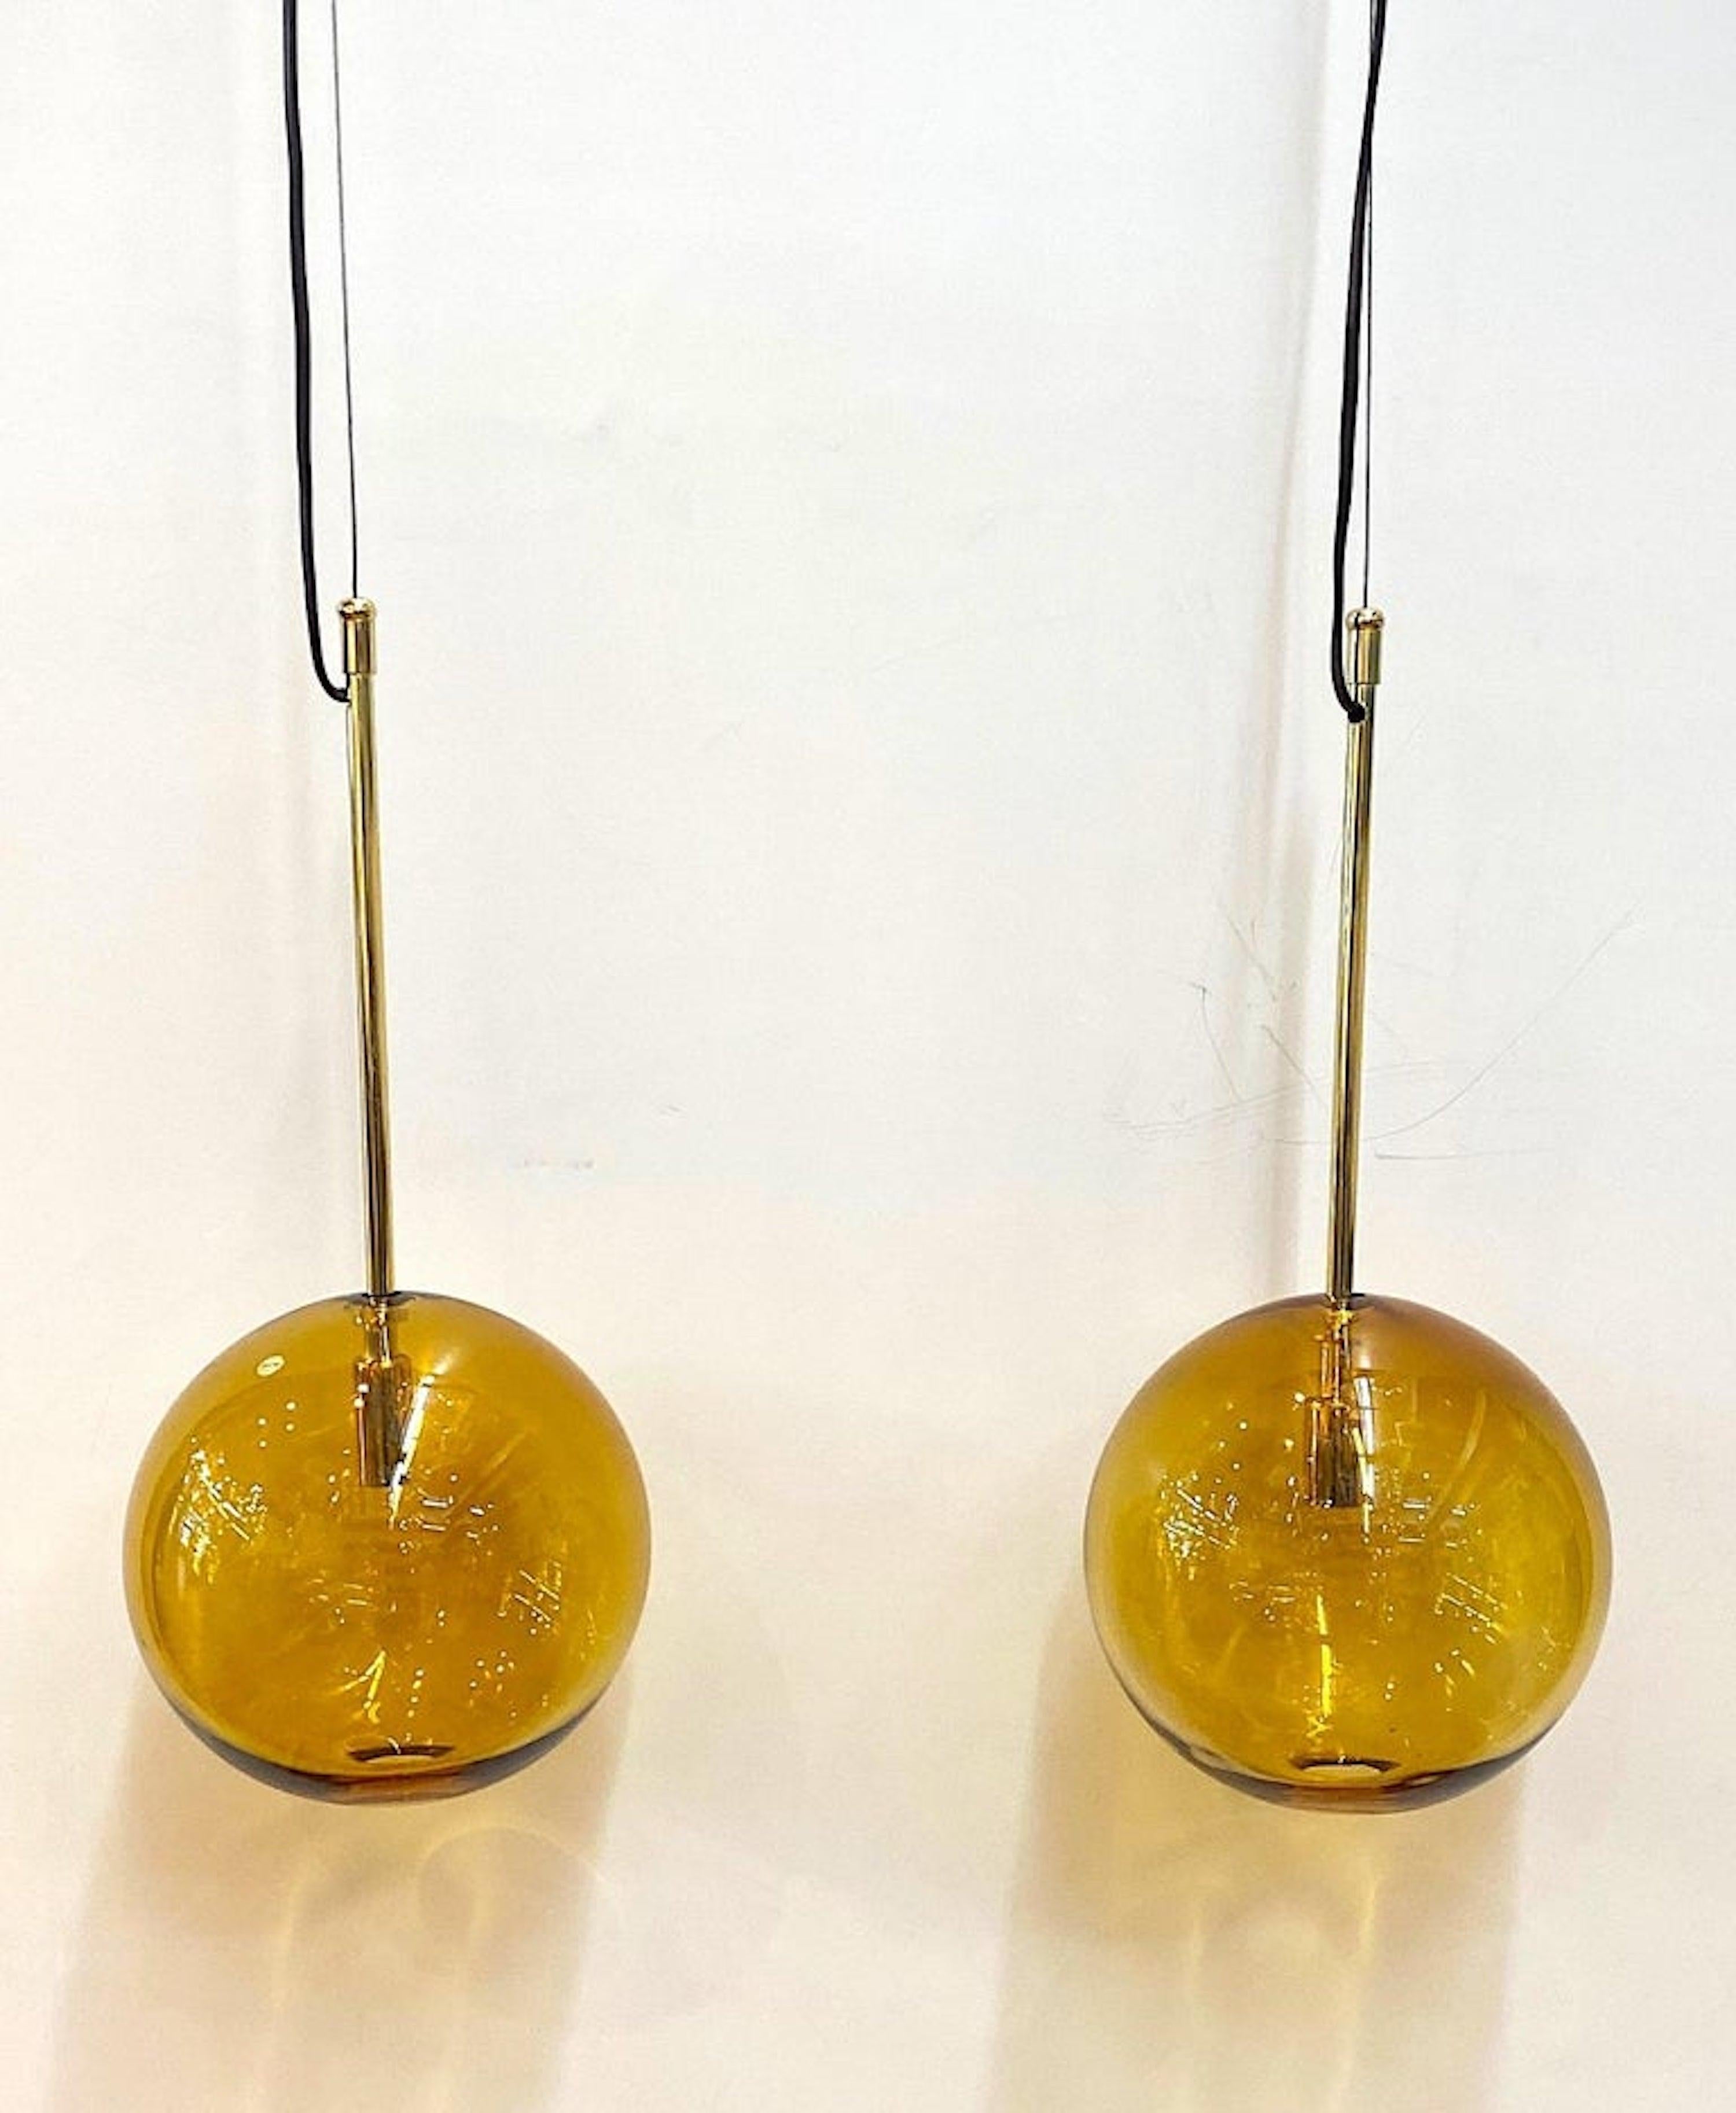 Italian hand blown Murano golden amber glass globe shade pendant lights. Six available. Each globe shade is 7 inches in diameter and rests on a brass rod for a 12 inch height. From the top of the rod is a steel cable. Just below on the side exits